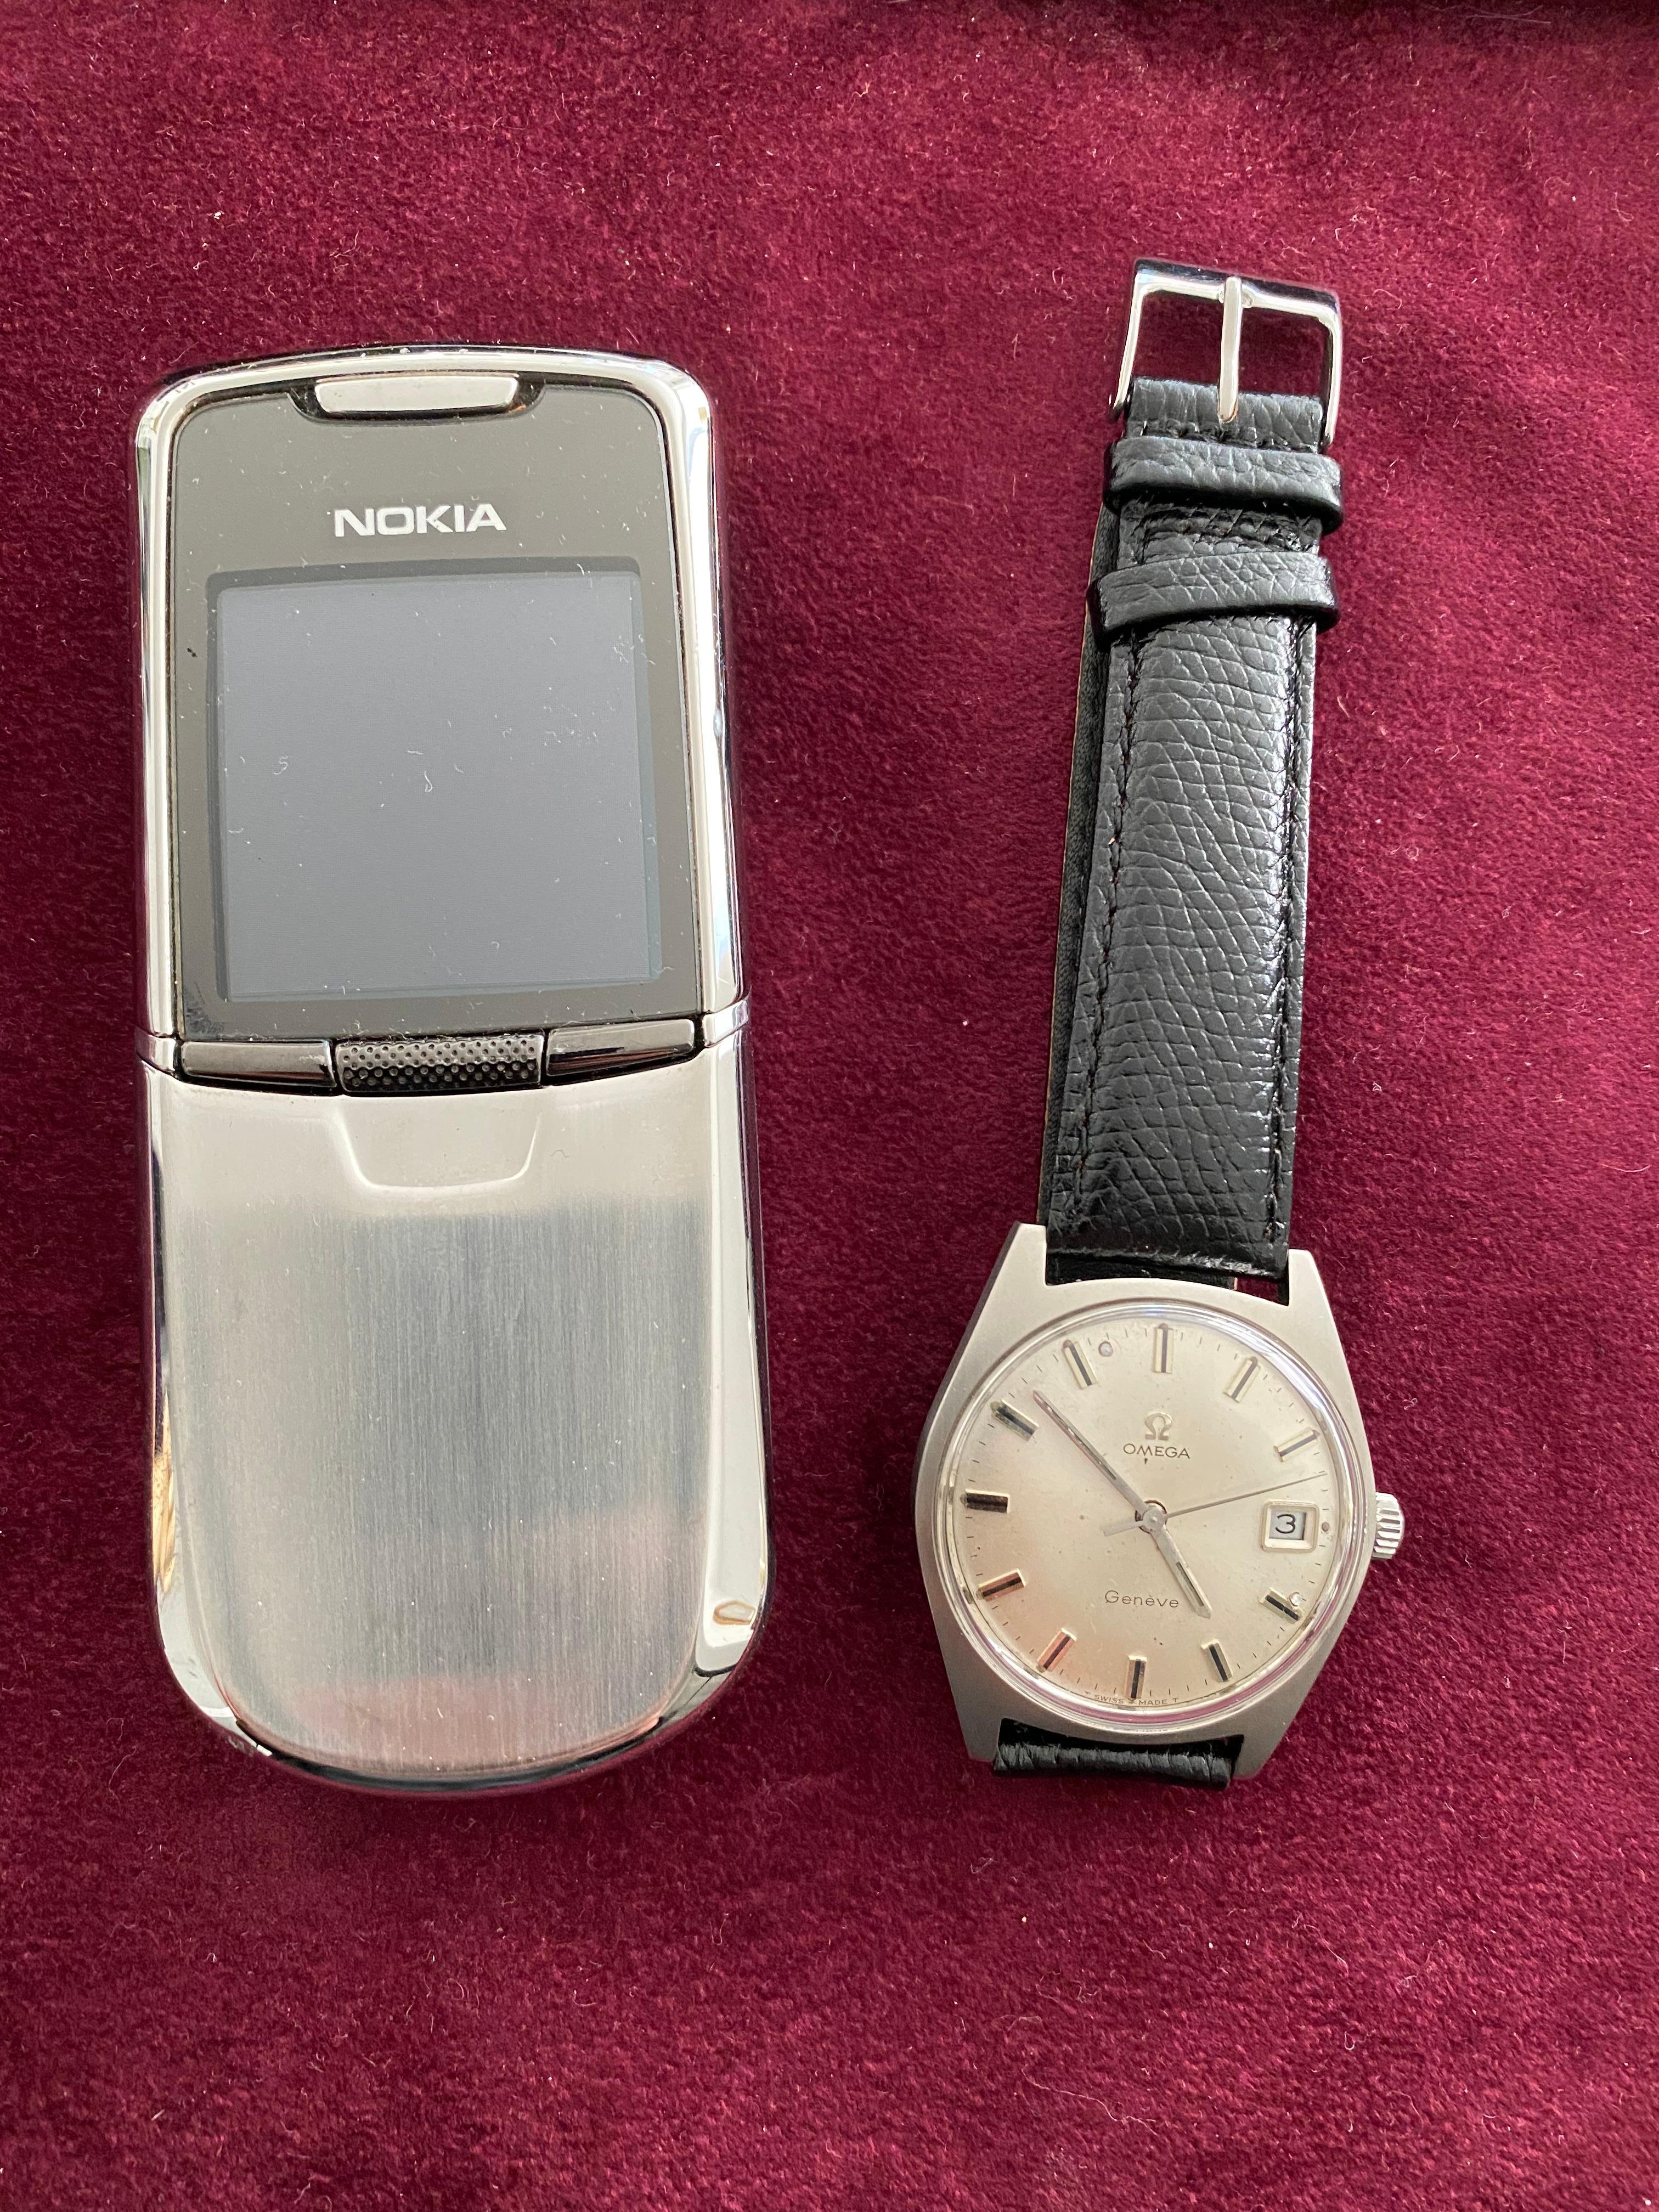 Omega (Genève) white face and black lather pattern strap. In mint condition. 
Omega Vintage Geneve Stainless Steel Automatic Watch. 
International collection : 1972 
Case material: Stainless Steel 
Vintage watch watchcase type: Screw-in 
Bracelet: